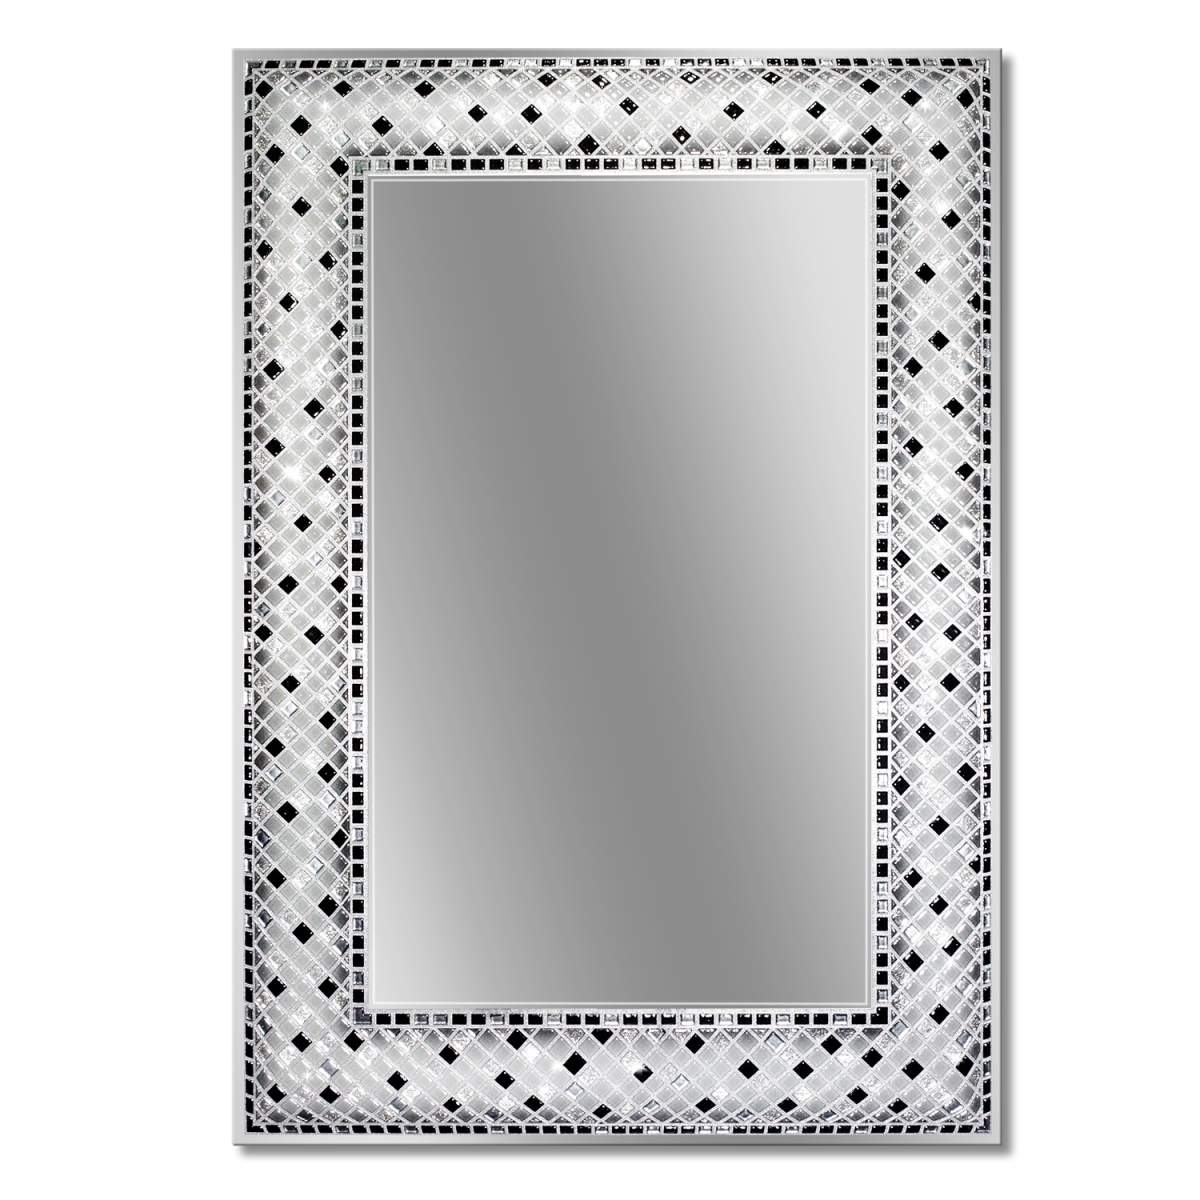 Head West 8126 22 X 32 In. Frameless Checkers Mosaic Wall Mirror - Rectangle